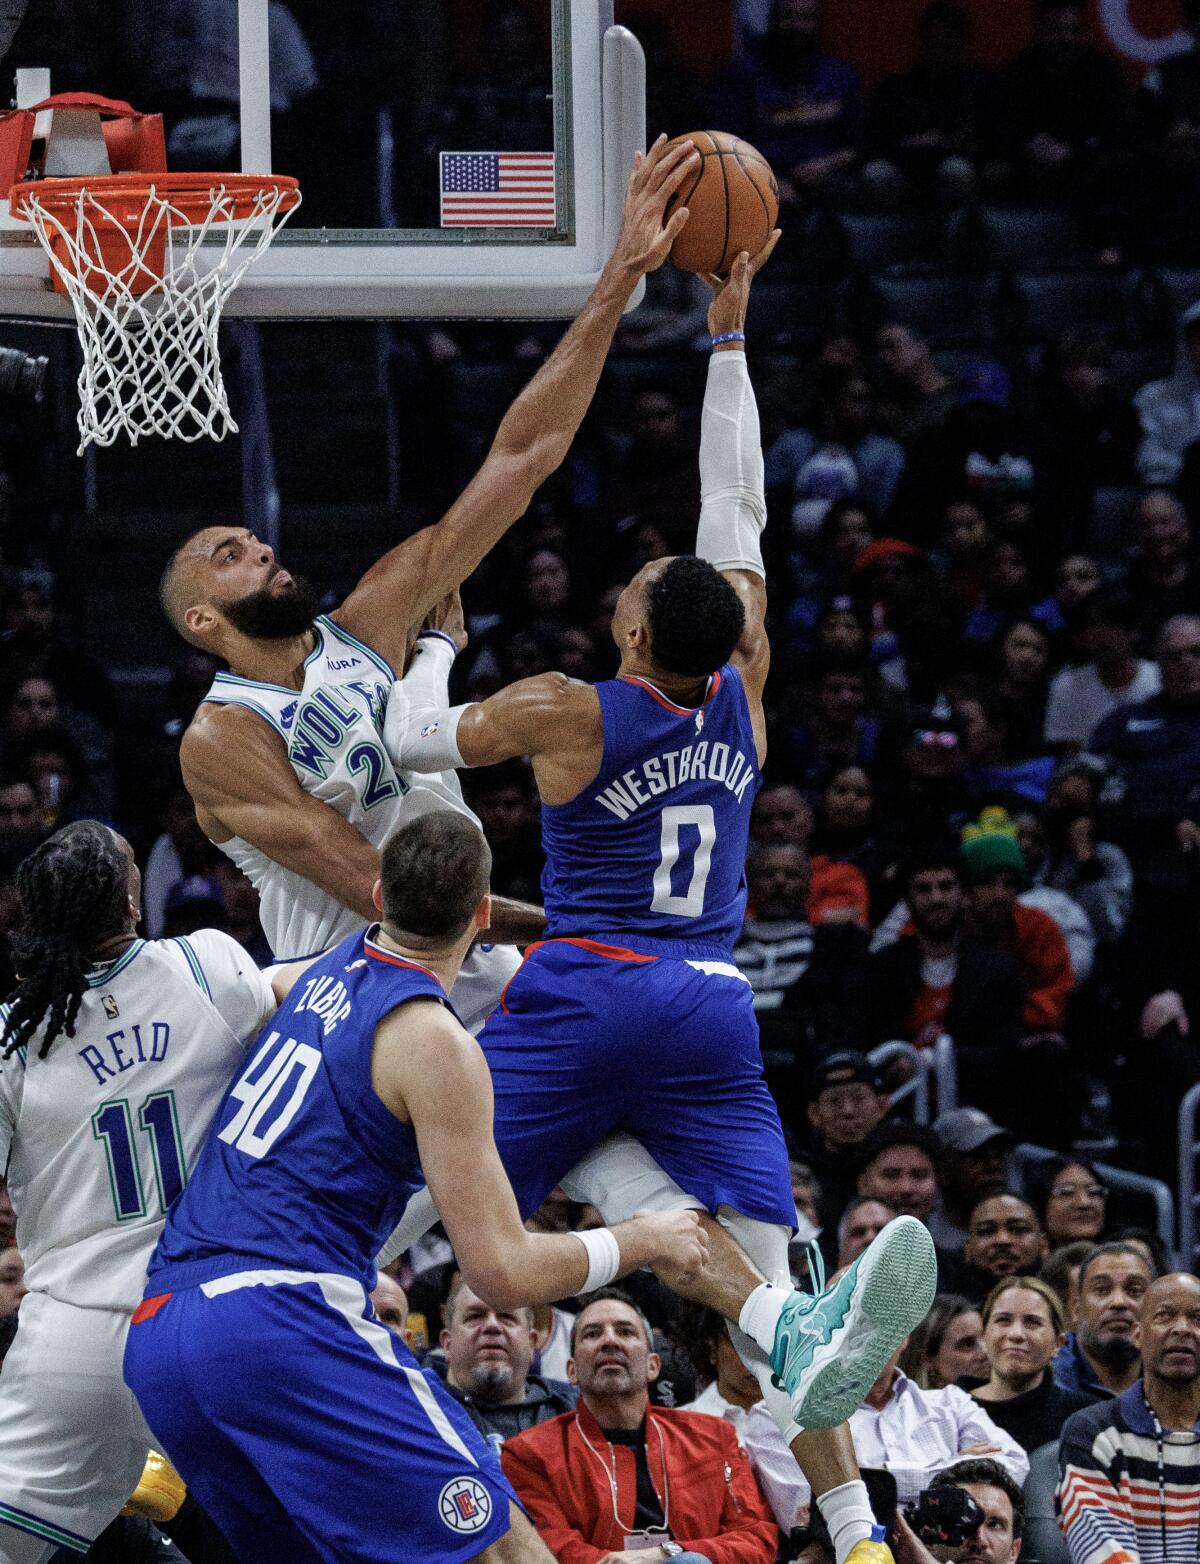 Minnesota center Rudy Gobert blocks a shot by Clippers guard Russell Westbrook during the second half Monday.